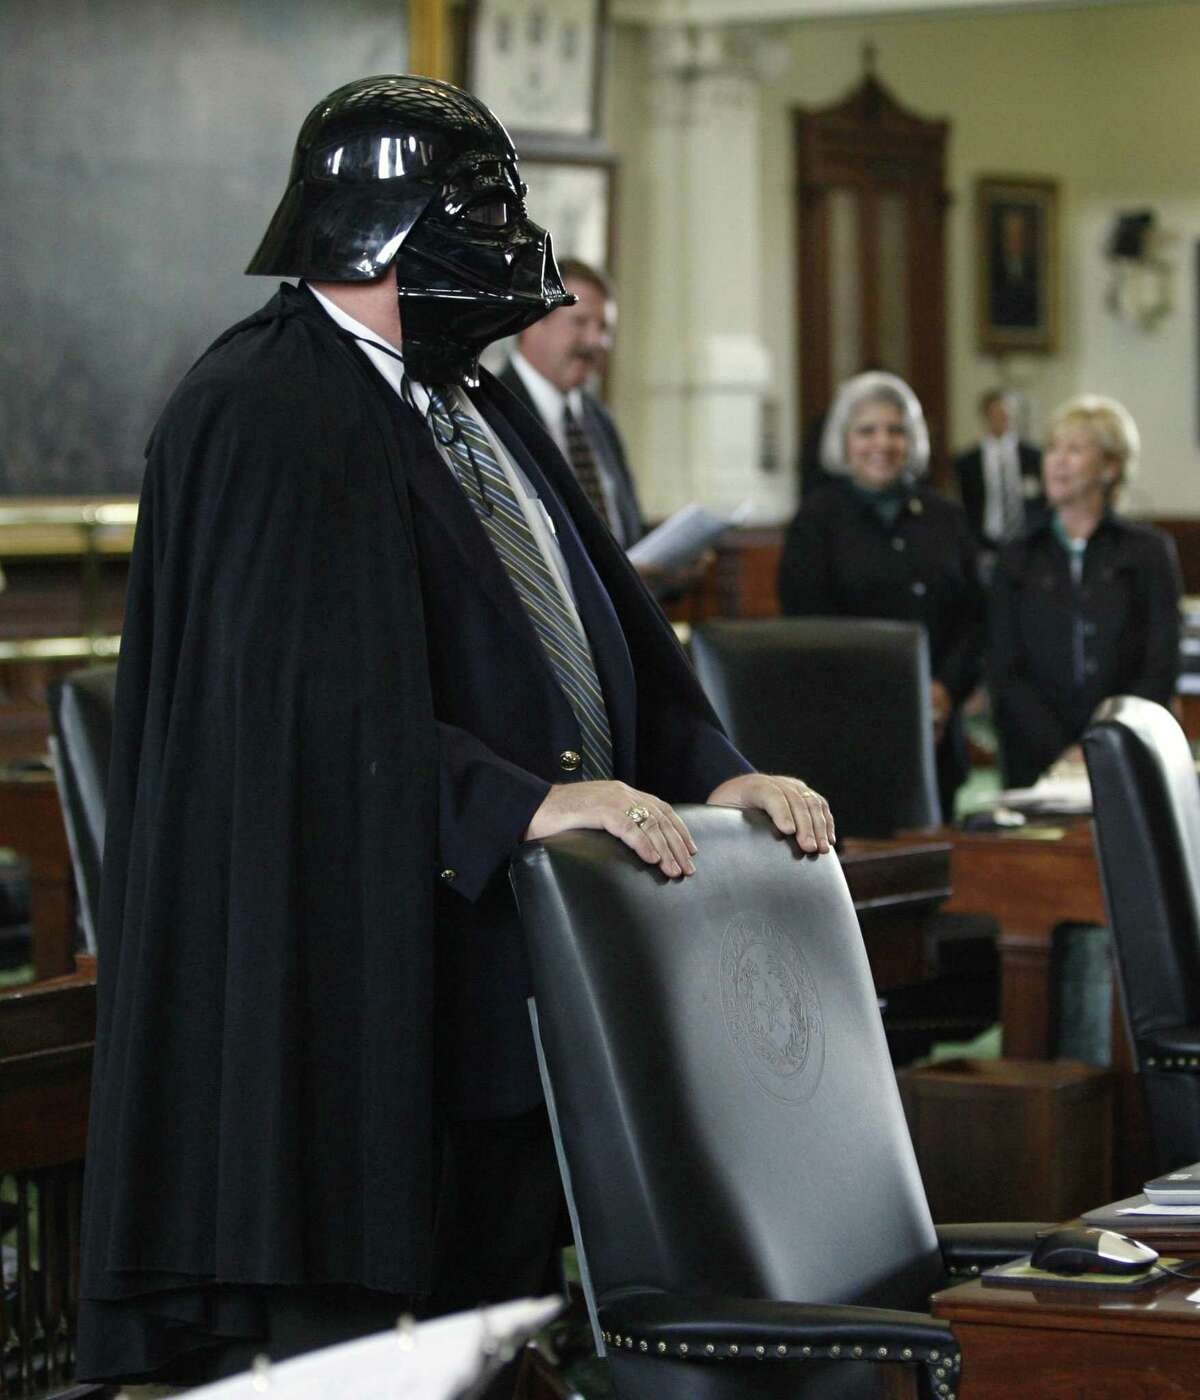 Sen. Tommy Williams, R-The Woodlands, stands at his desk wearing a Darth Vader mask and cape during the session in the Texas Senate, Thursday, May 10, 2007, in Austin, Texas. In the background are, from left, Sen. Mike Jackson, R-La Porte, Sen. Judith Zaffirini, D-Laredo, and Sen. Florence Shapiro, R-Plano. The costume was a response to a newspaper editorial calling Williams the "prince of darkness." (AP Photo/Harry Cabluck)